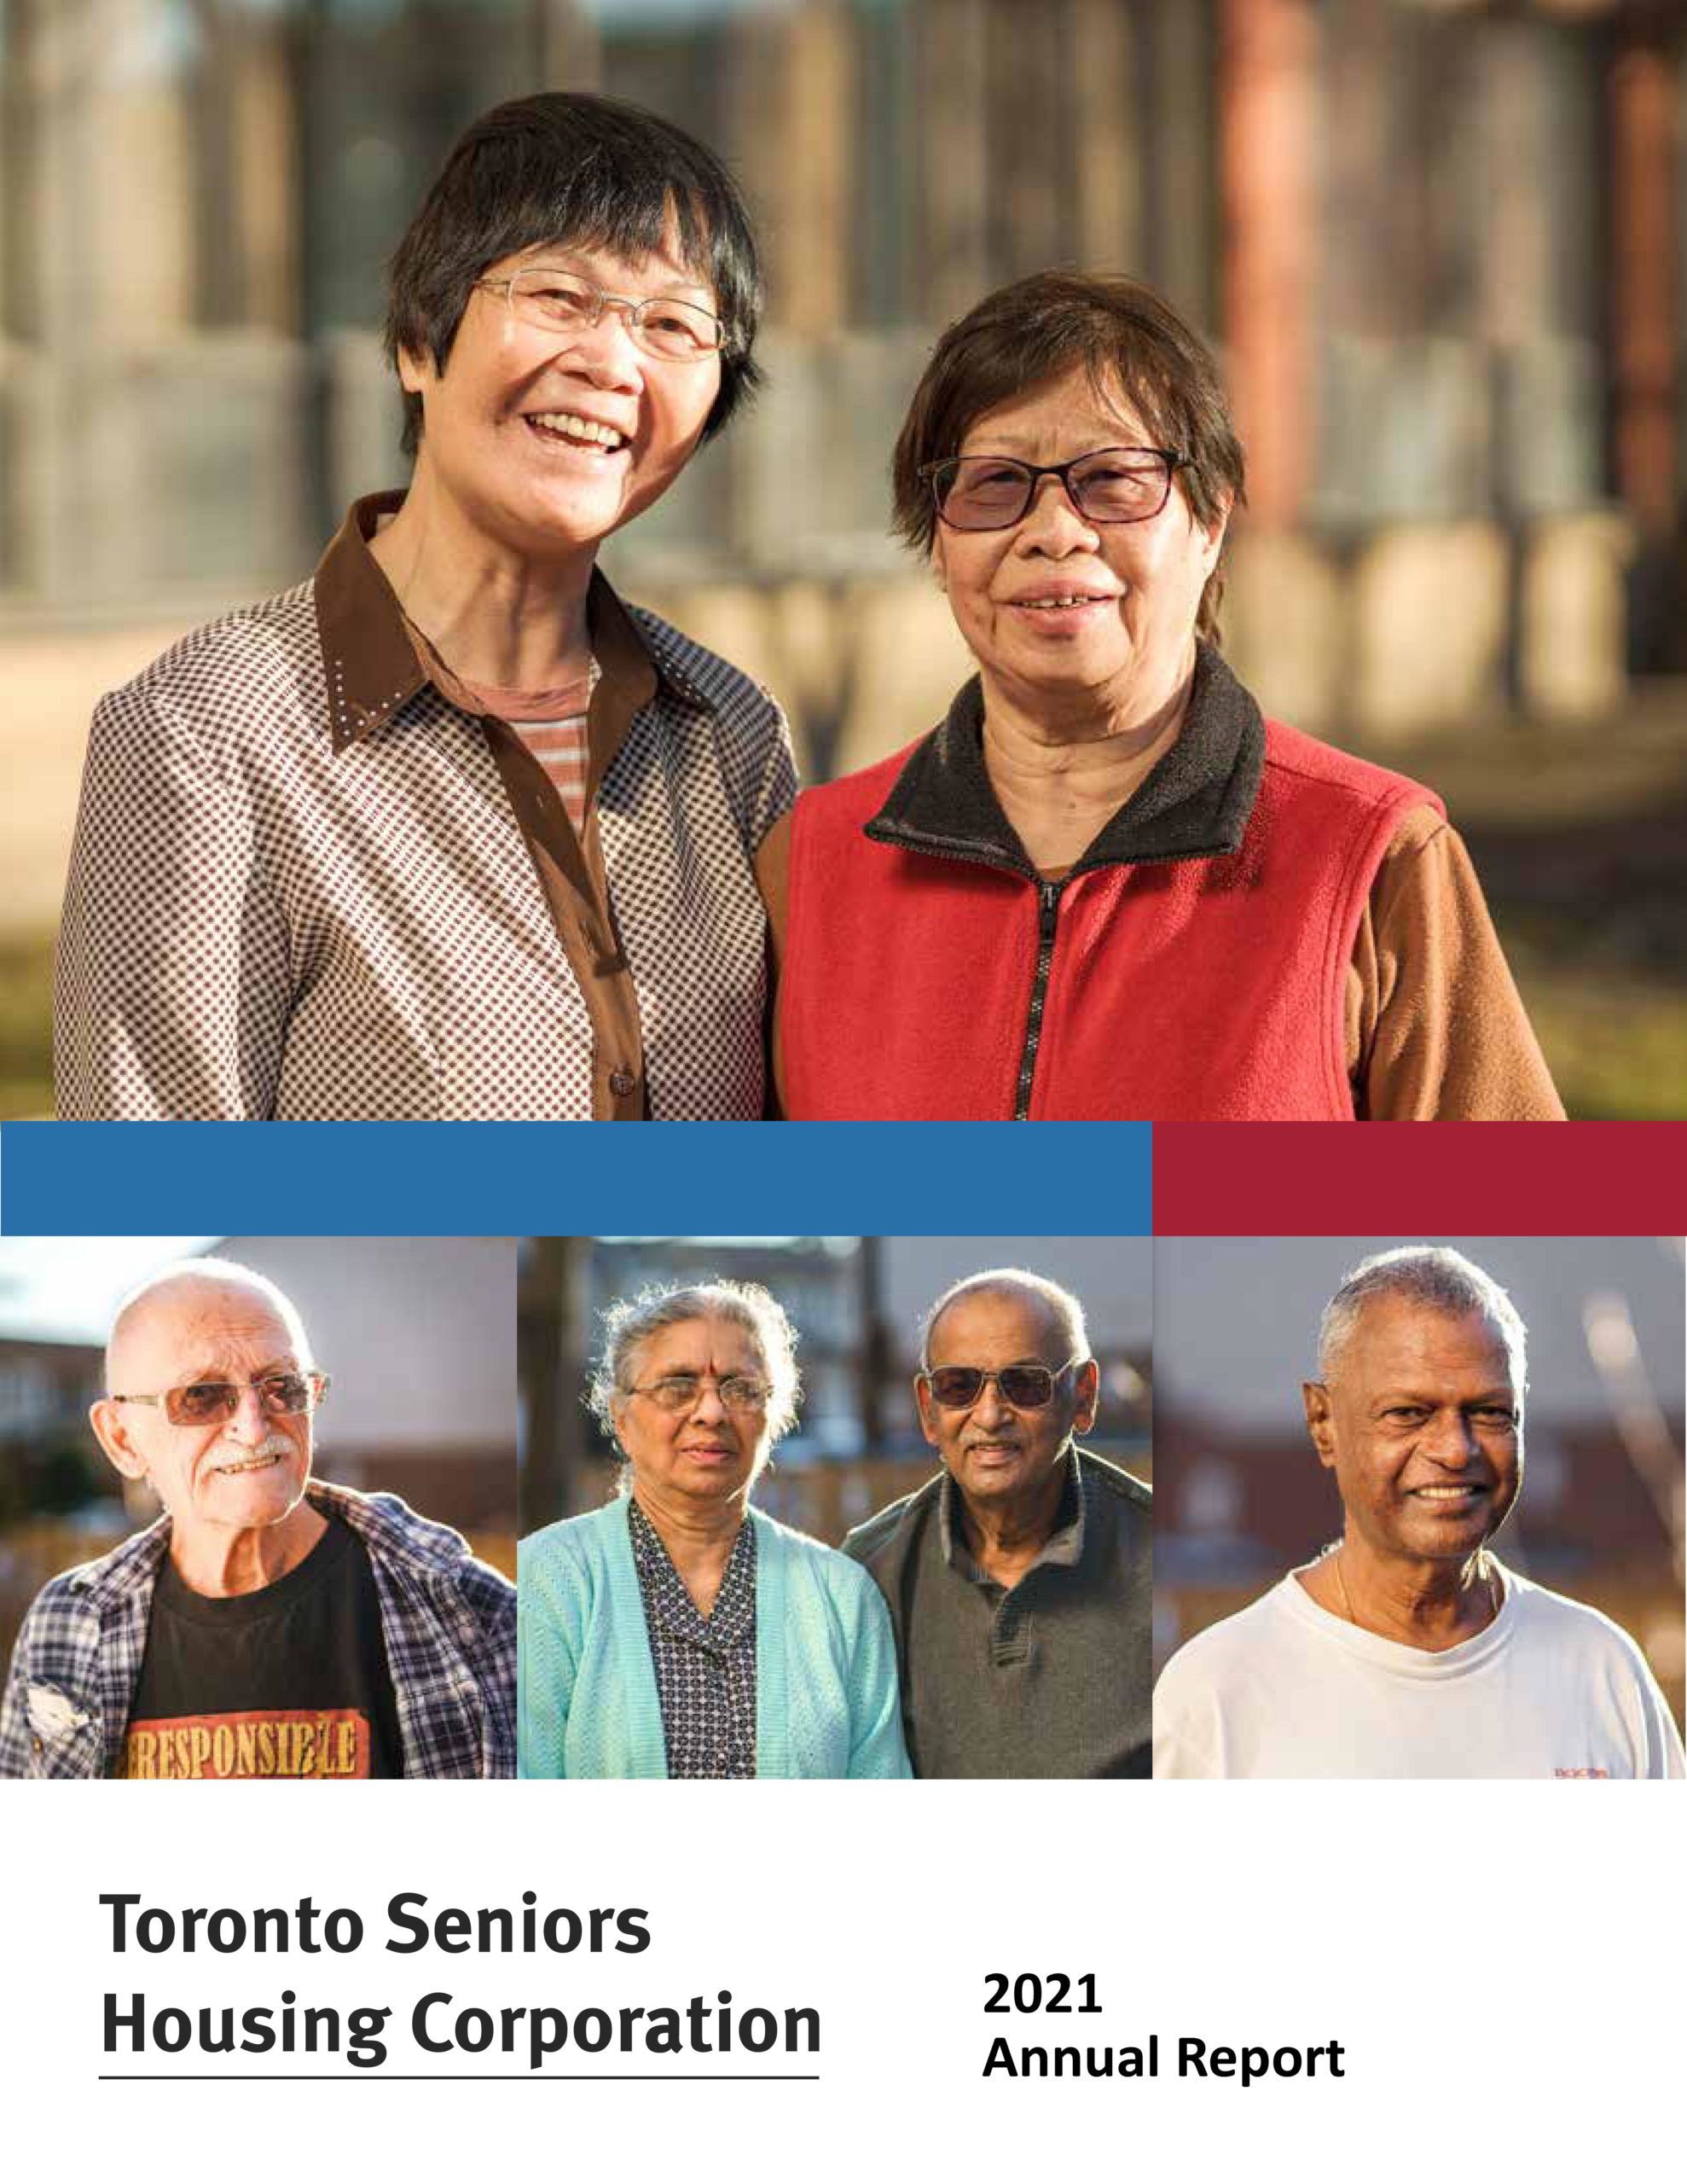 The cover of Toronto Seniors Housing's 2021 annual report.